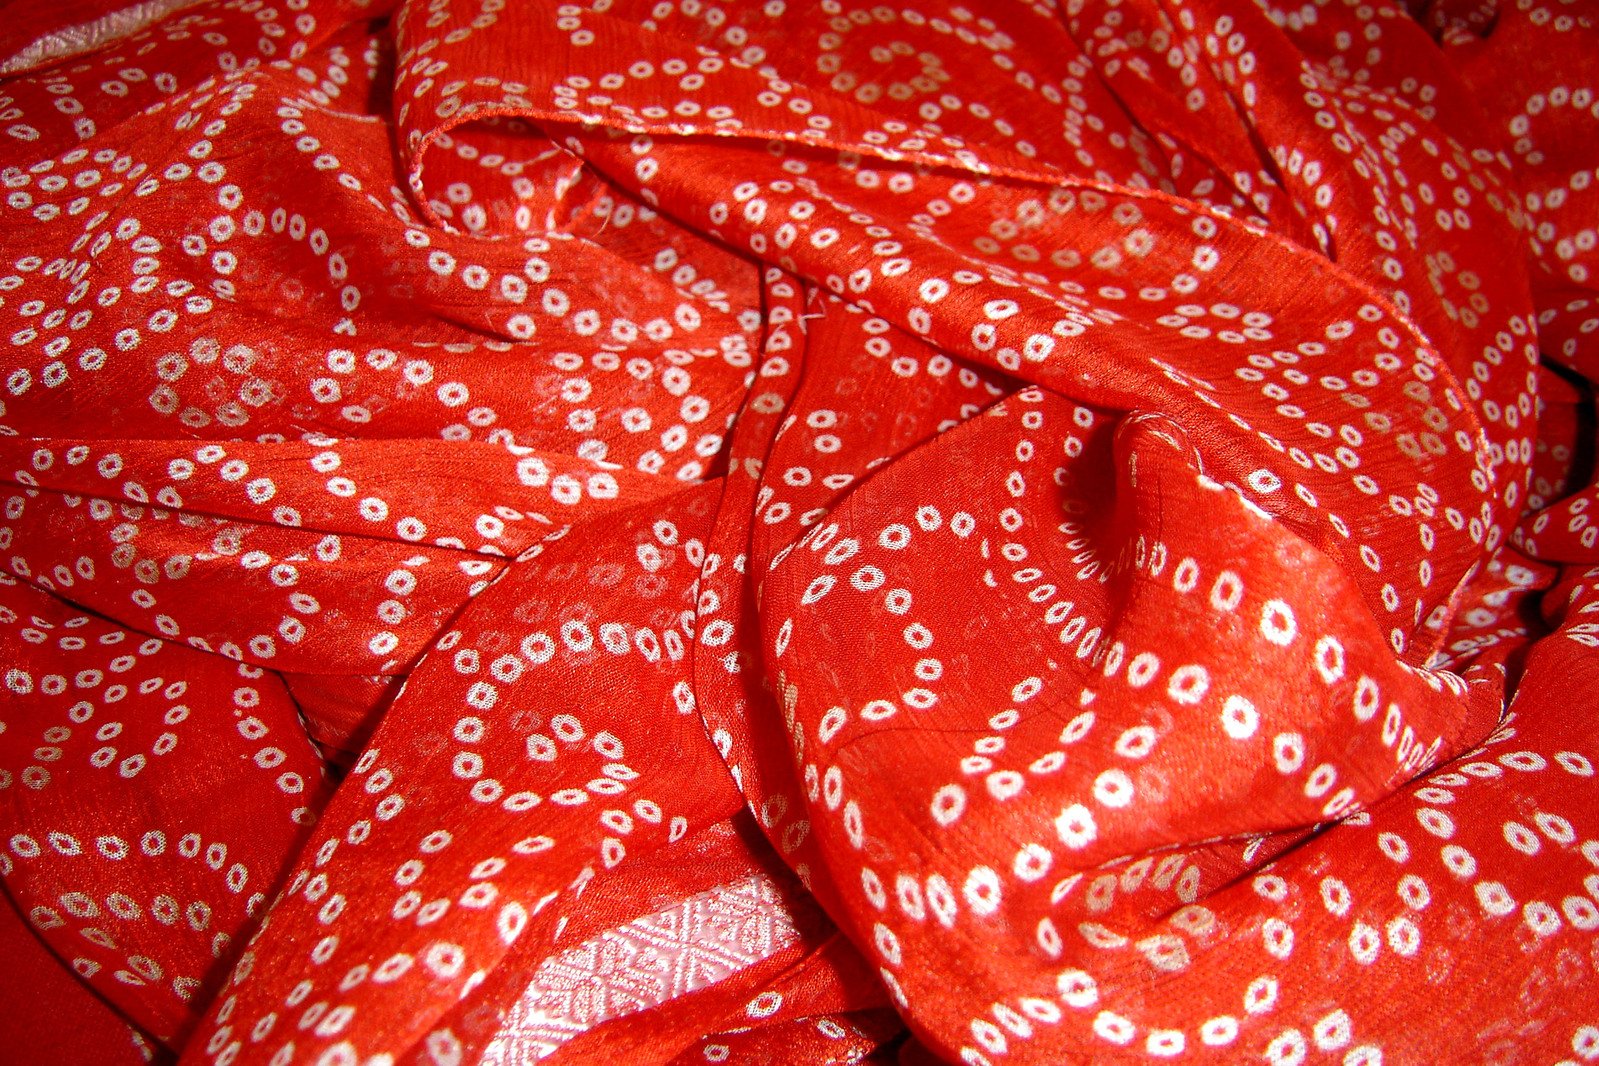 closeup of a red patterned cloth with white and red dots